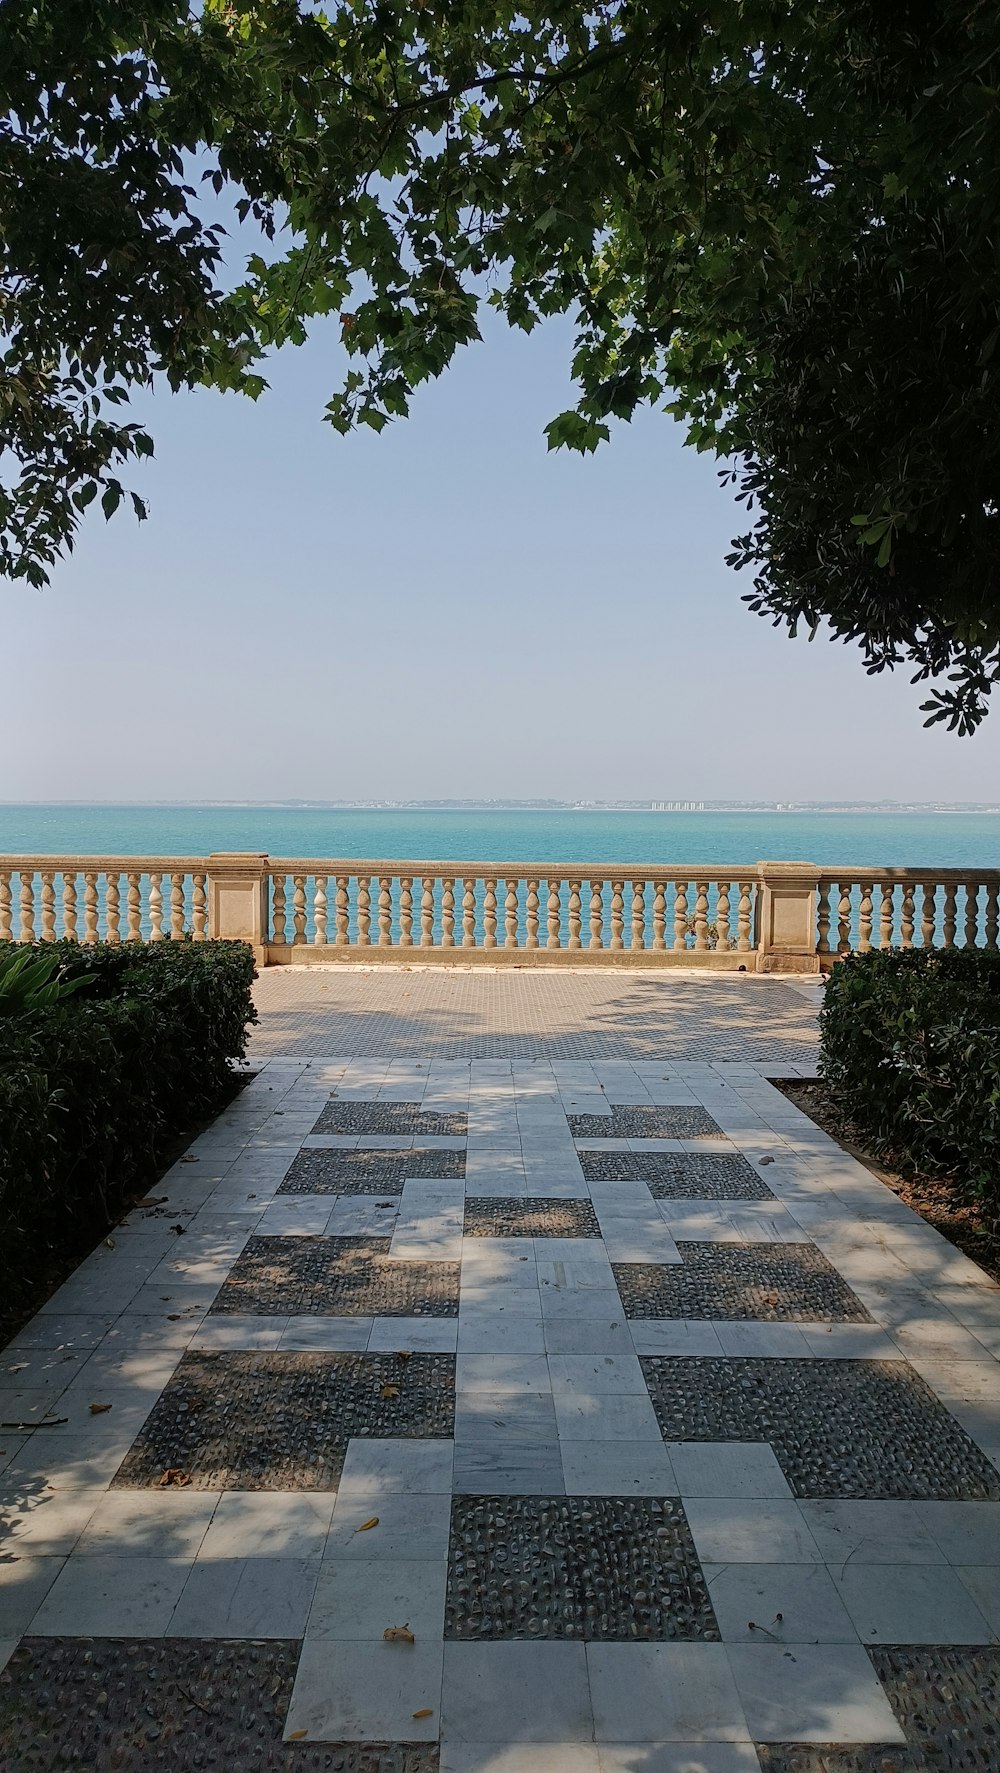 a view of the ocean from a park bench